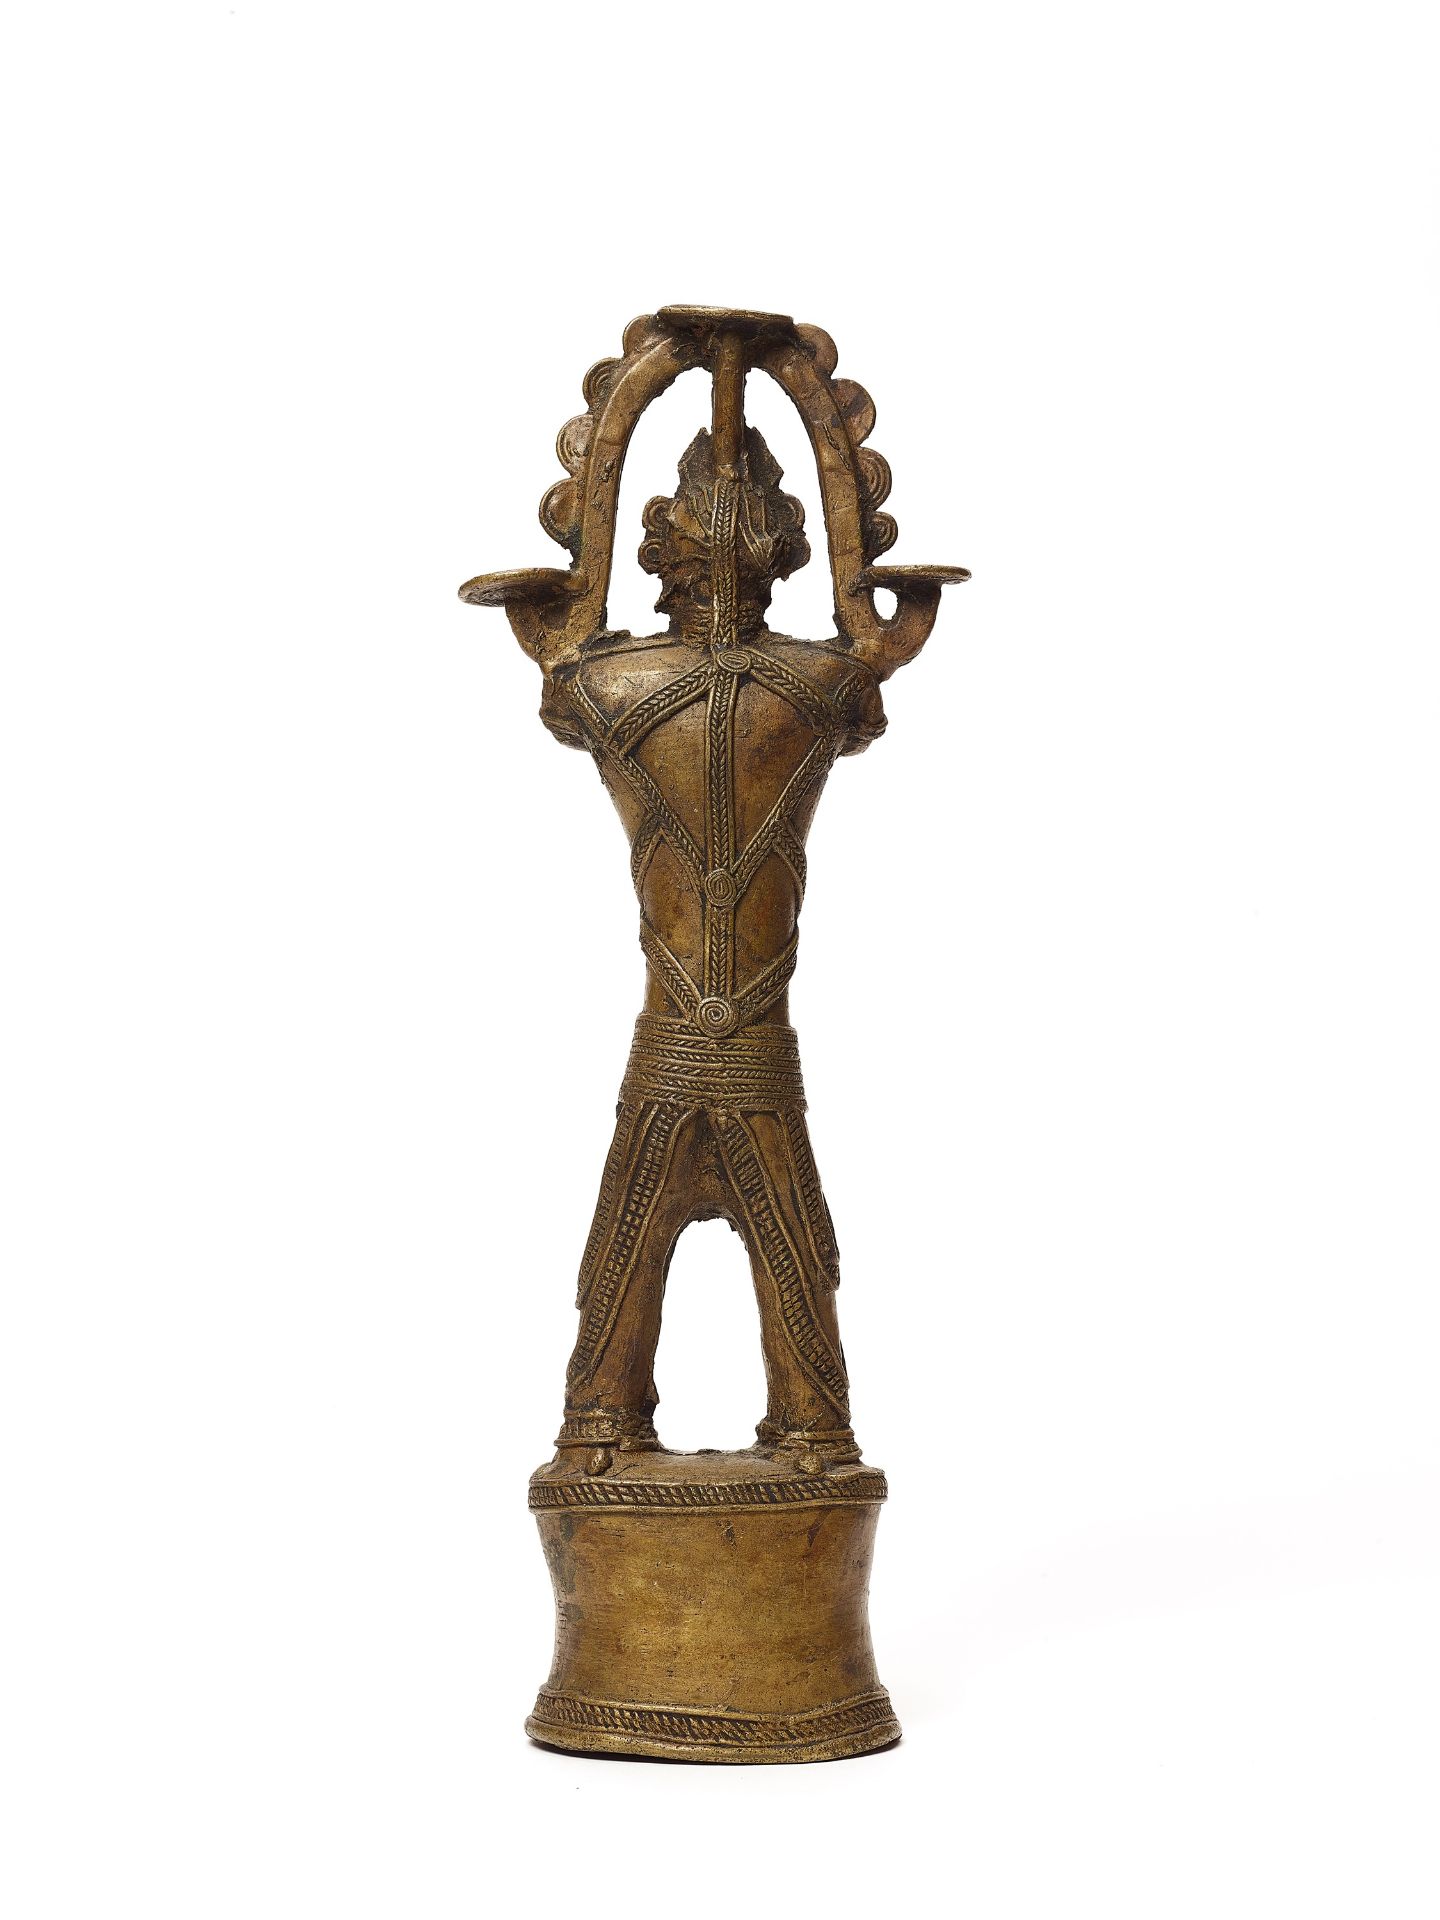 A BASTAR BRONZE OF A FEMALE DEITY HOLDING A VESSEL - Image 4 of 4